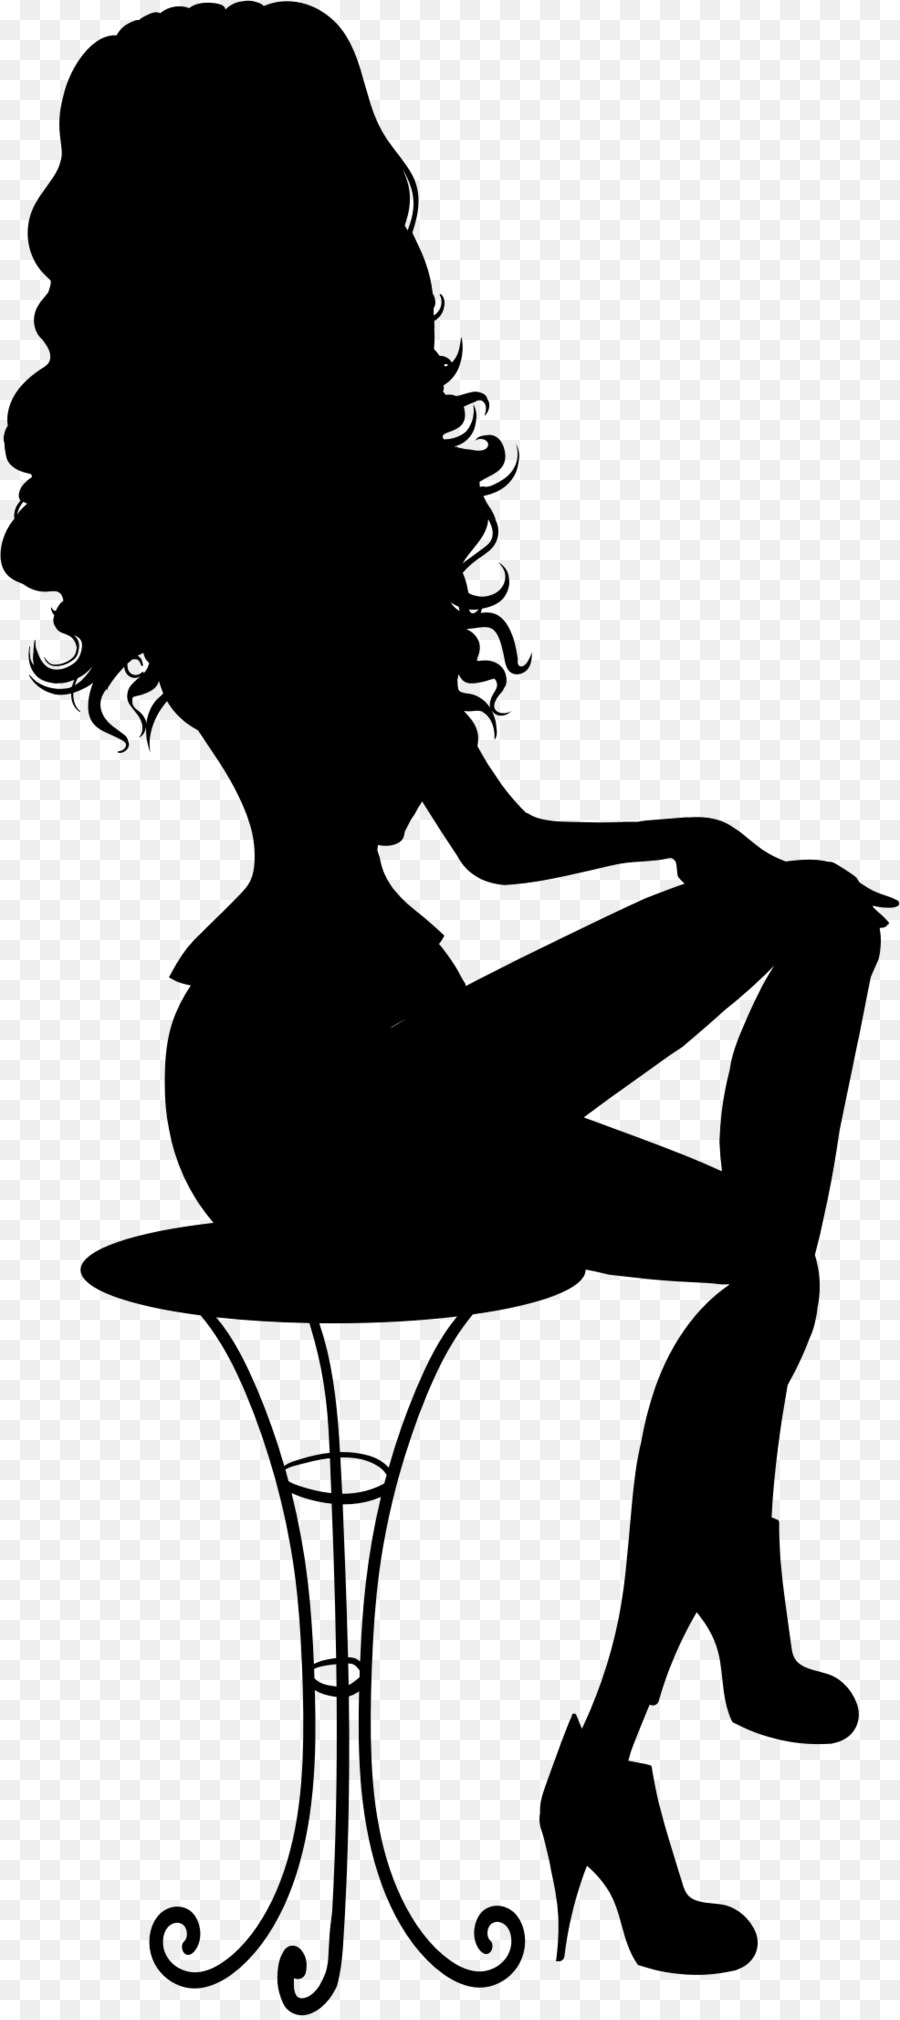 Woman Silhouette Sitting Clip art - woman silhouette png download - 986*2209 - Free Transparent Woman png Download.